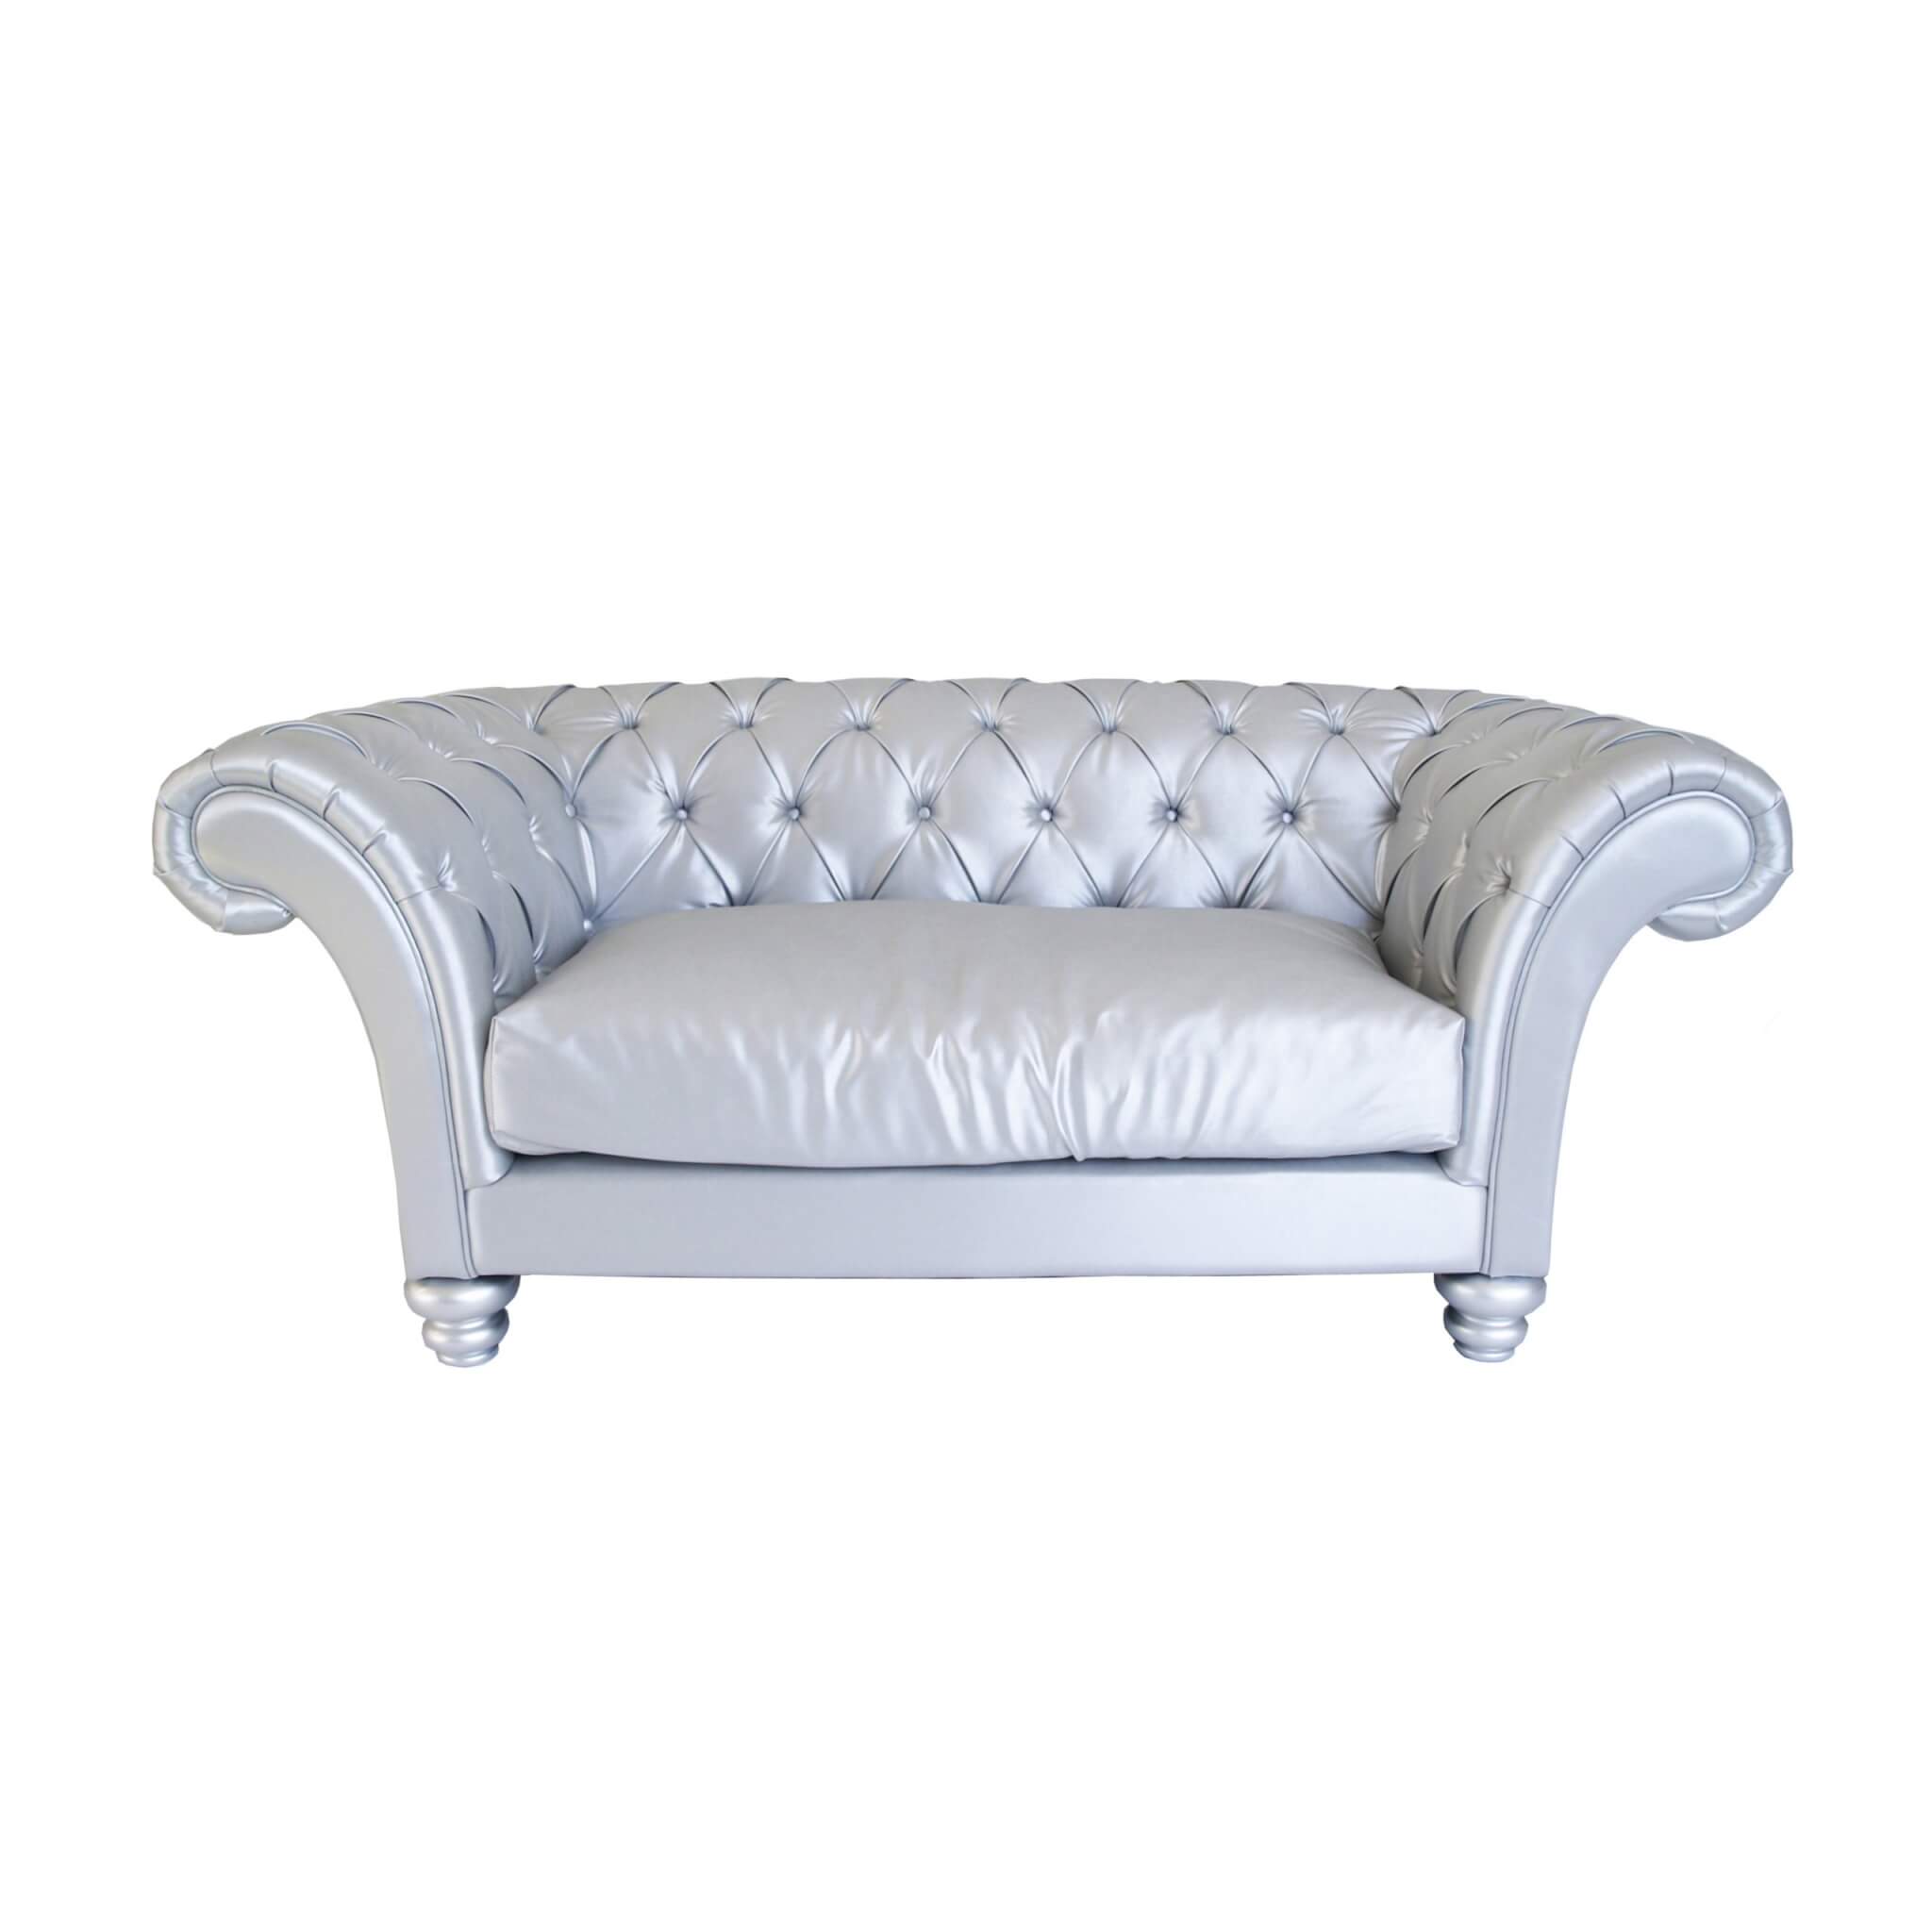 Versailles Two Seater Lounge – Silver – 200cmL x 108cmW x 80cmH